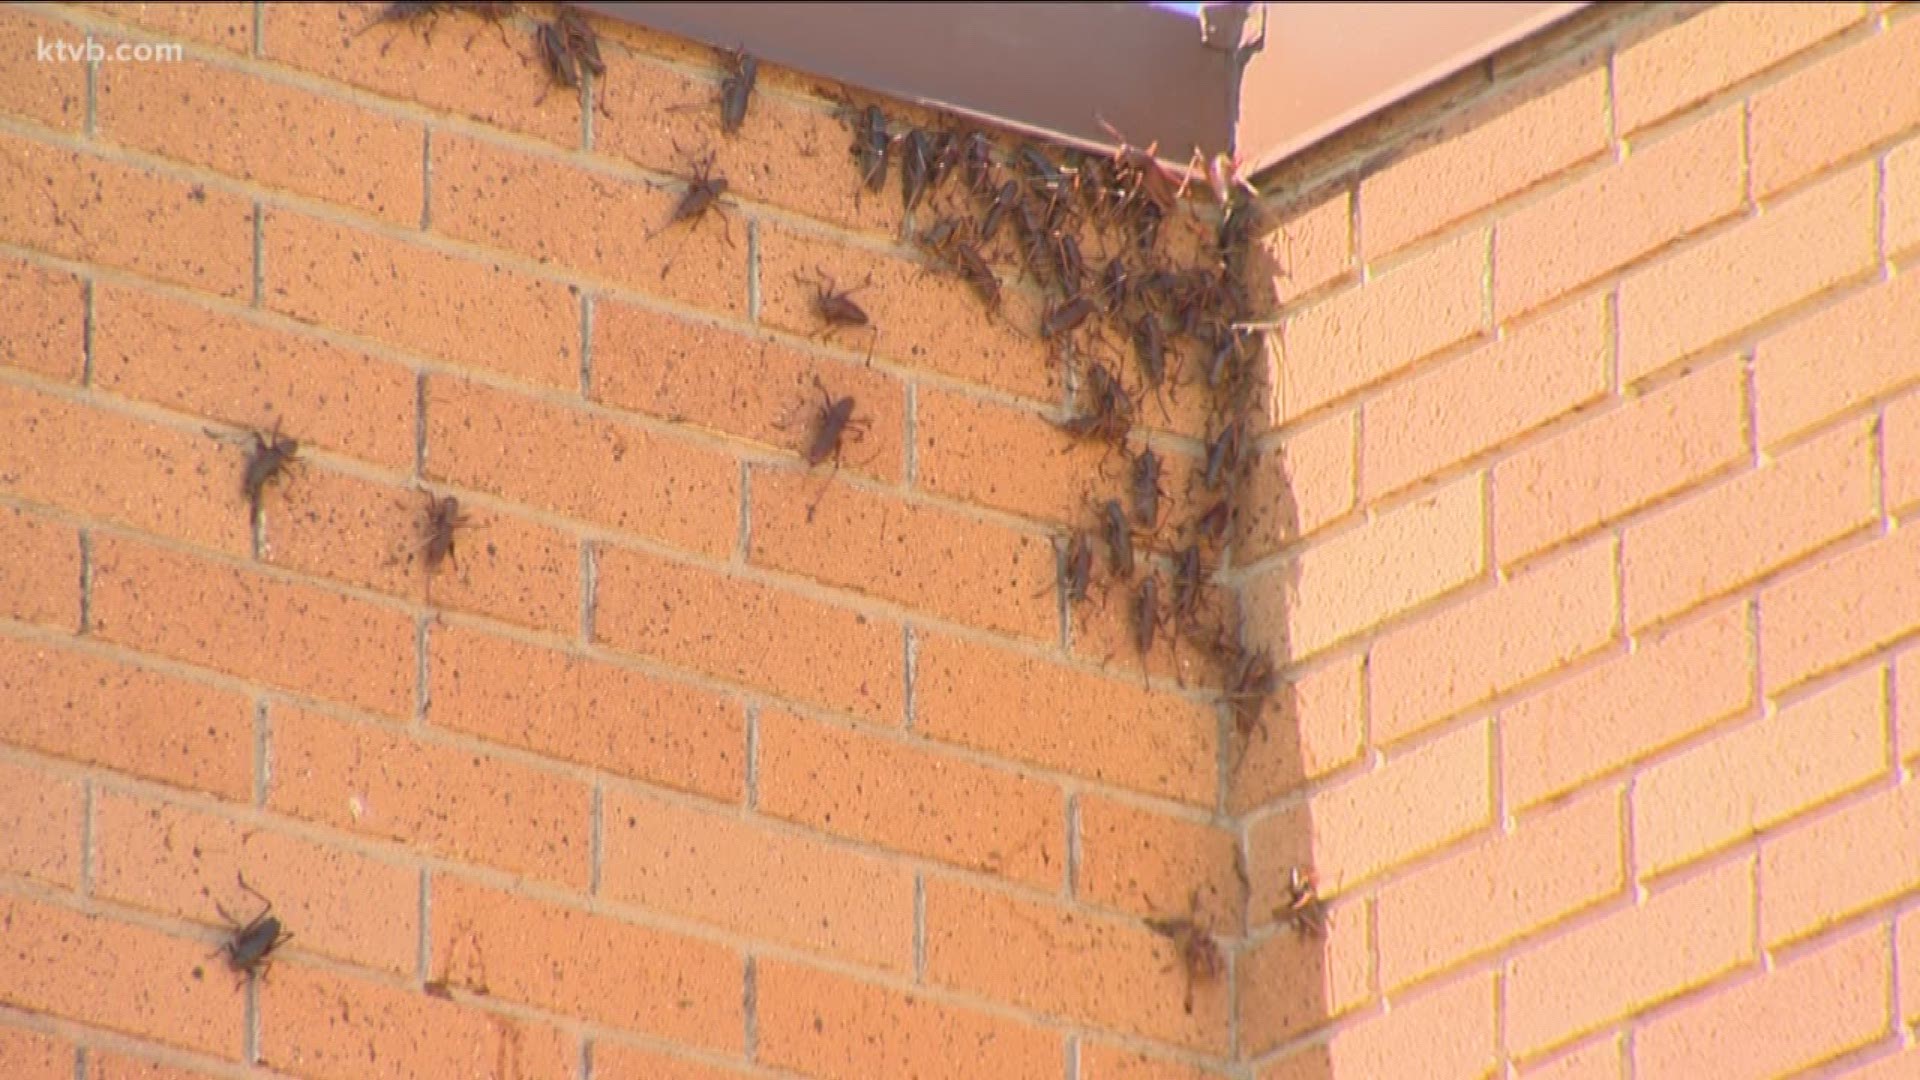 A KTVB crew in town for another story captured video of the migrating insects crawling everywhere.